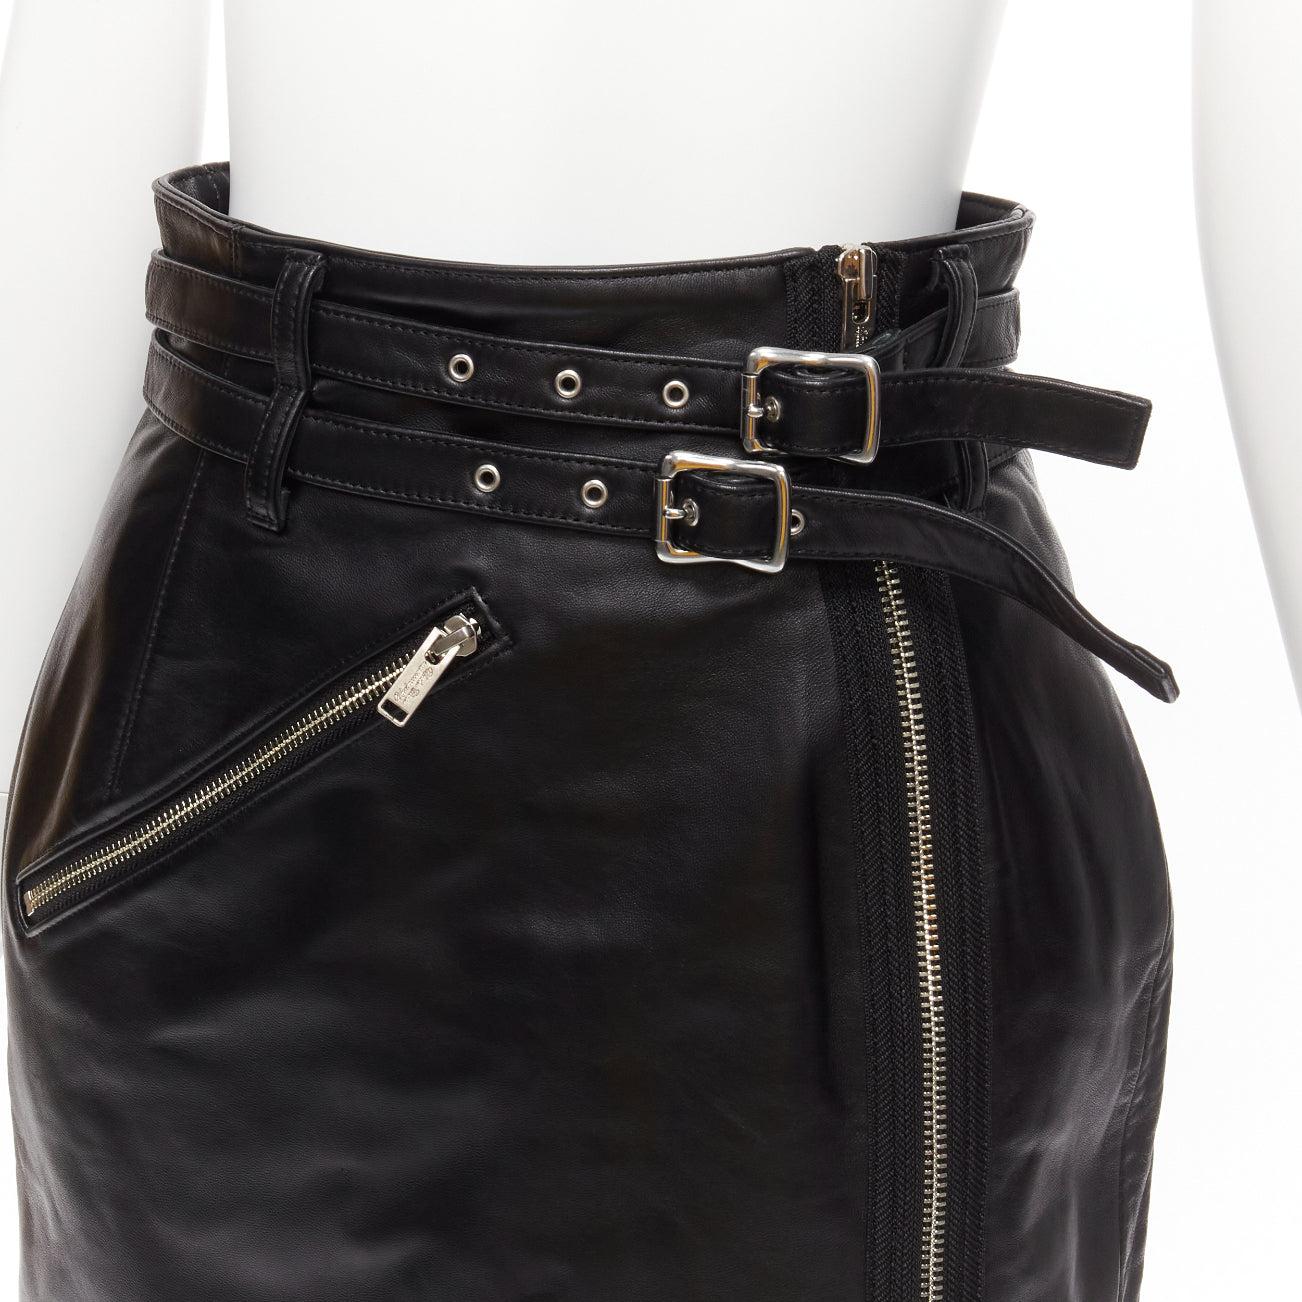 new UNDERCOVER black sheep leather silver zip motorcycle biker skirt JP2 M
Reference: TGAS/D00712
Brand: Undercover
Material: Leather
Color: Black, Silver
Pattern: Solid
Closure: Zip
Lining: Black Cupro
Extra Details: Black skirt from Undercover.